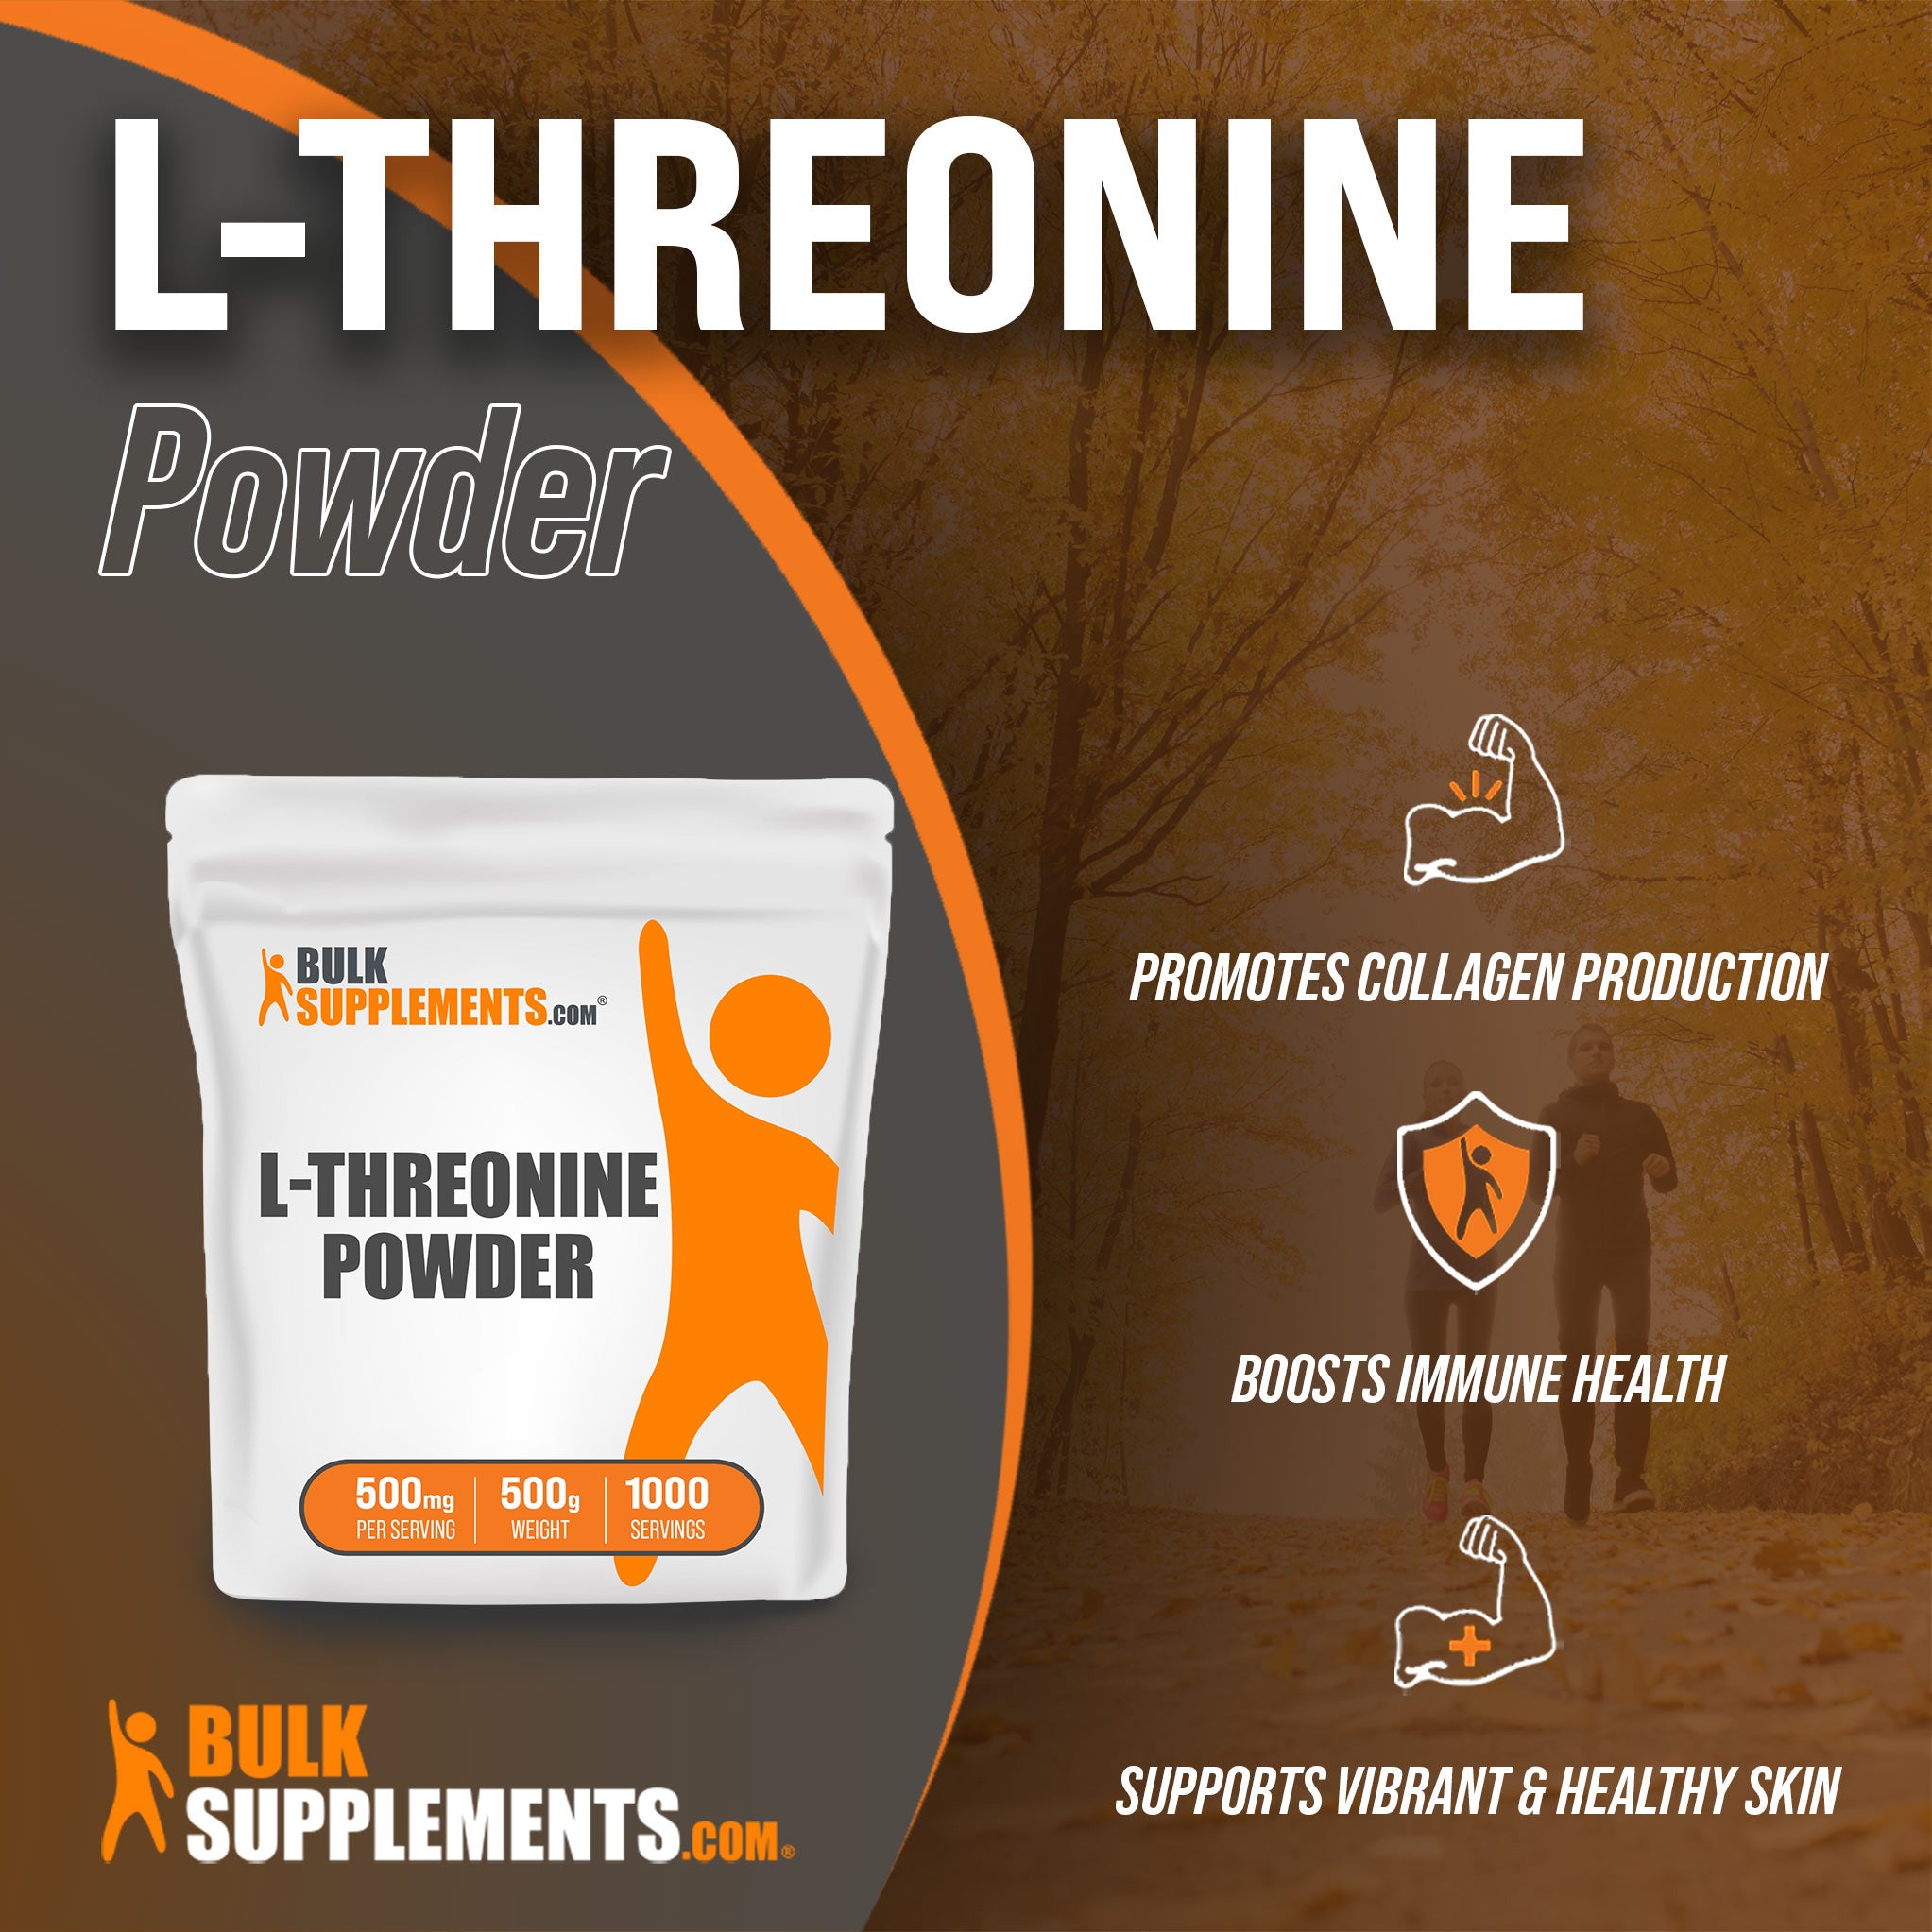 Benefits of L-Threonine: promotes collagen production, boosts immune health, supports vibrant and healthy skin